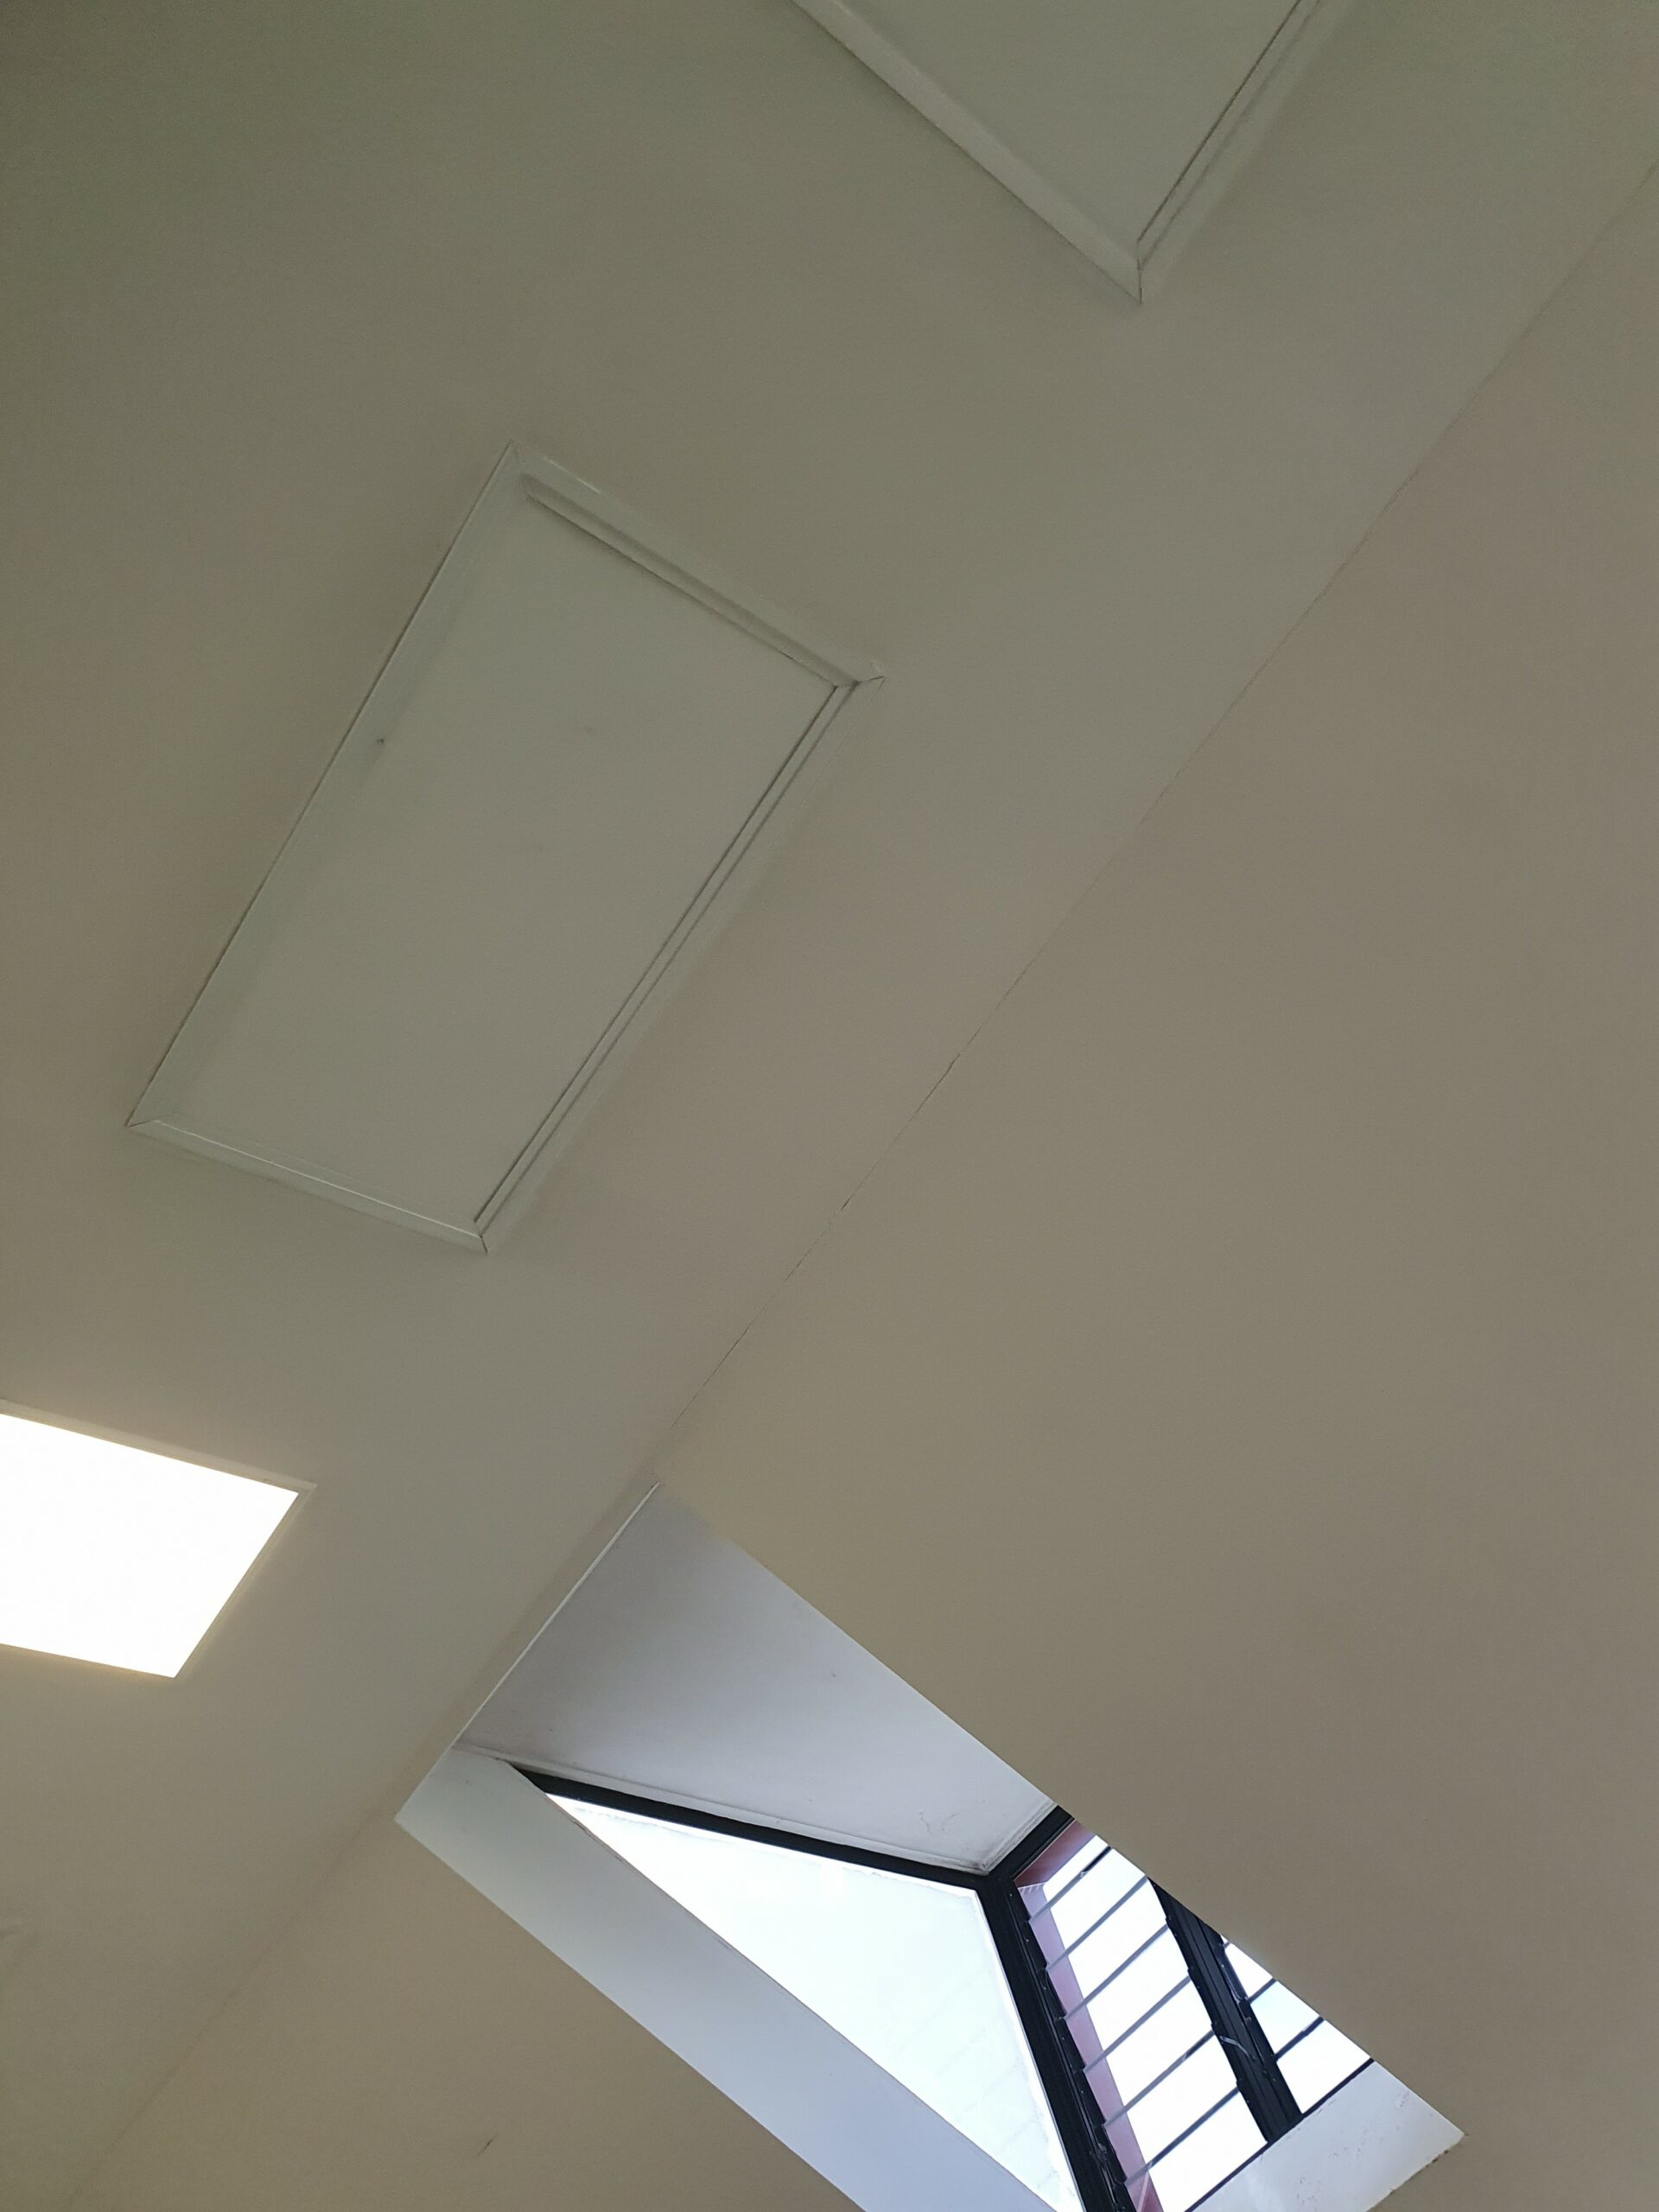 Diagonal angular ceiling line, with a square light in the ceiling and recessed skylight